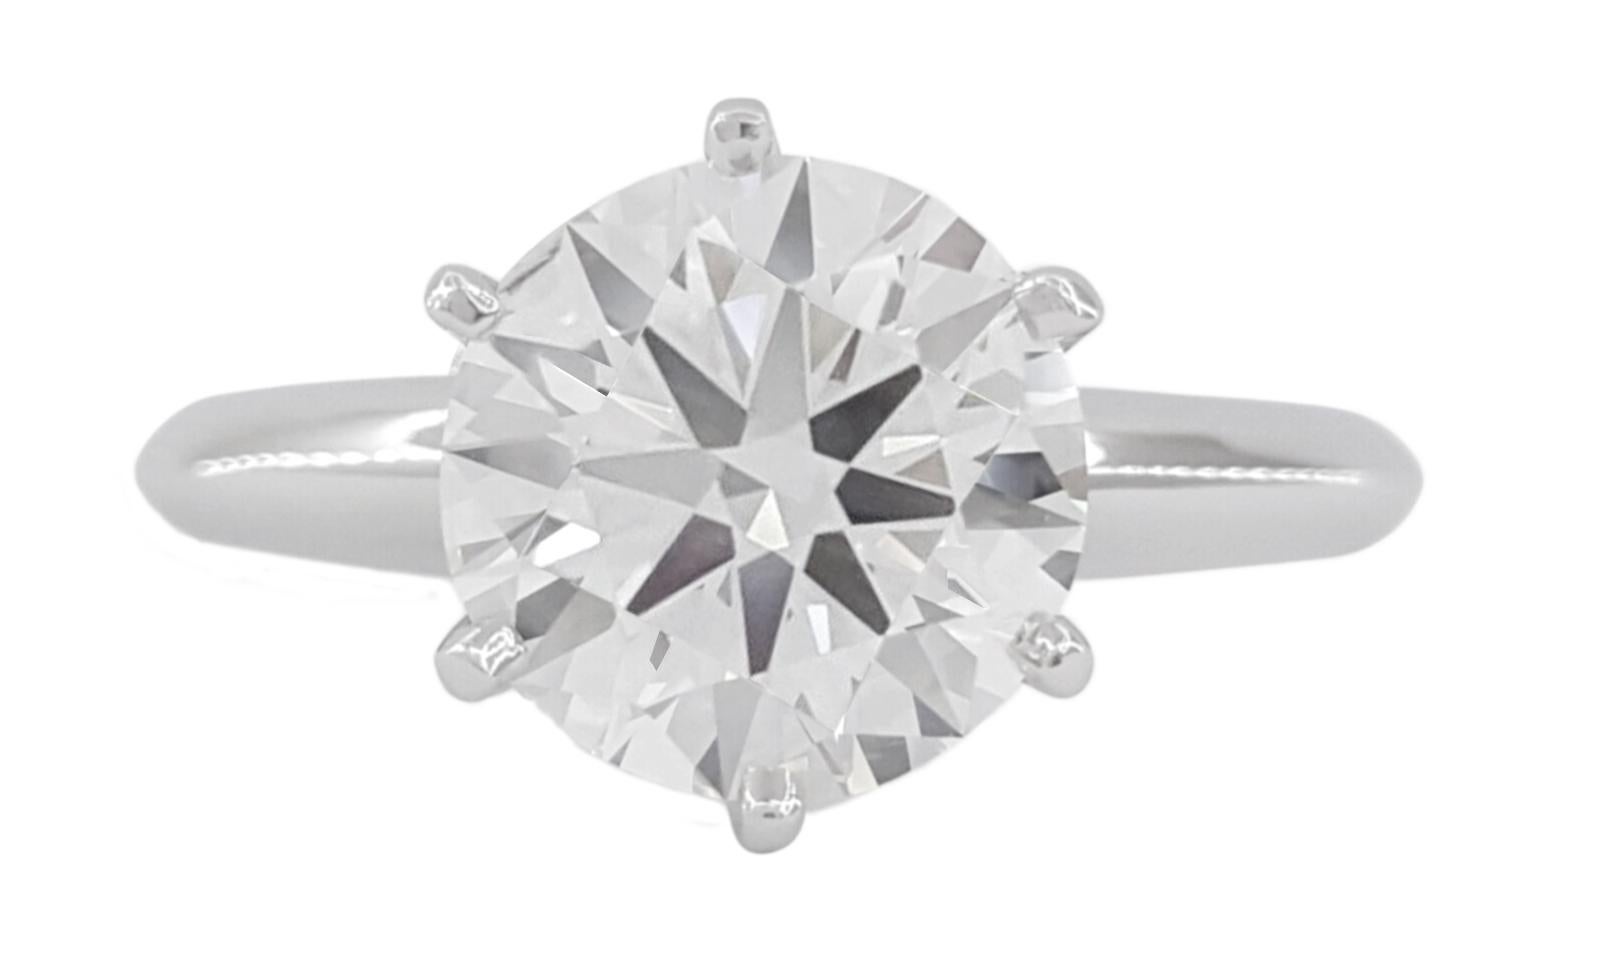 Tiffany & Co. 2.15 ct Platinum Round Brilliant Cut Diamond Solitaire Engagement Ring. 
GIA Report included
reizable



